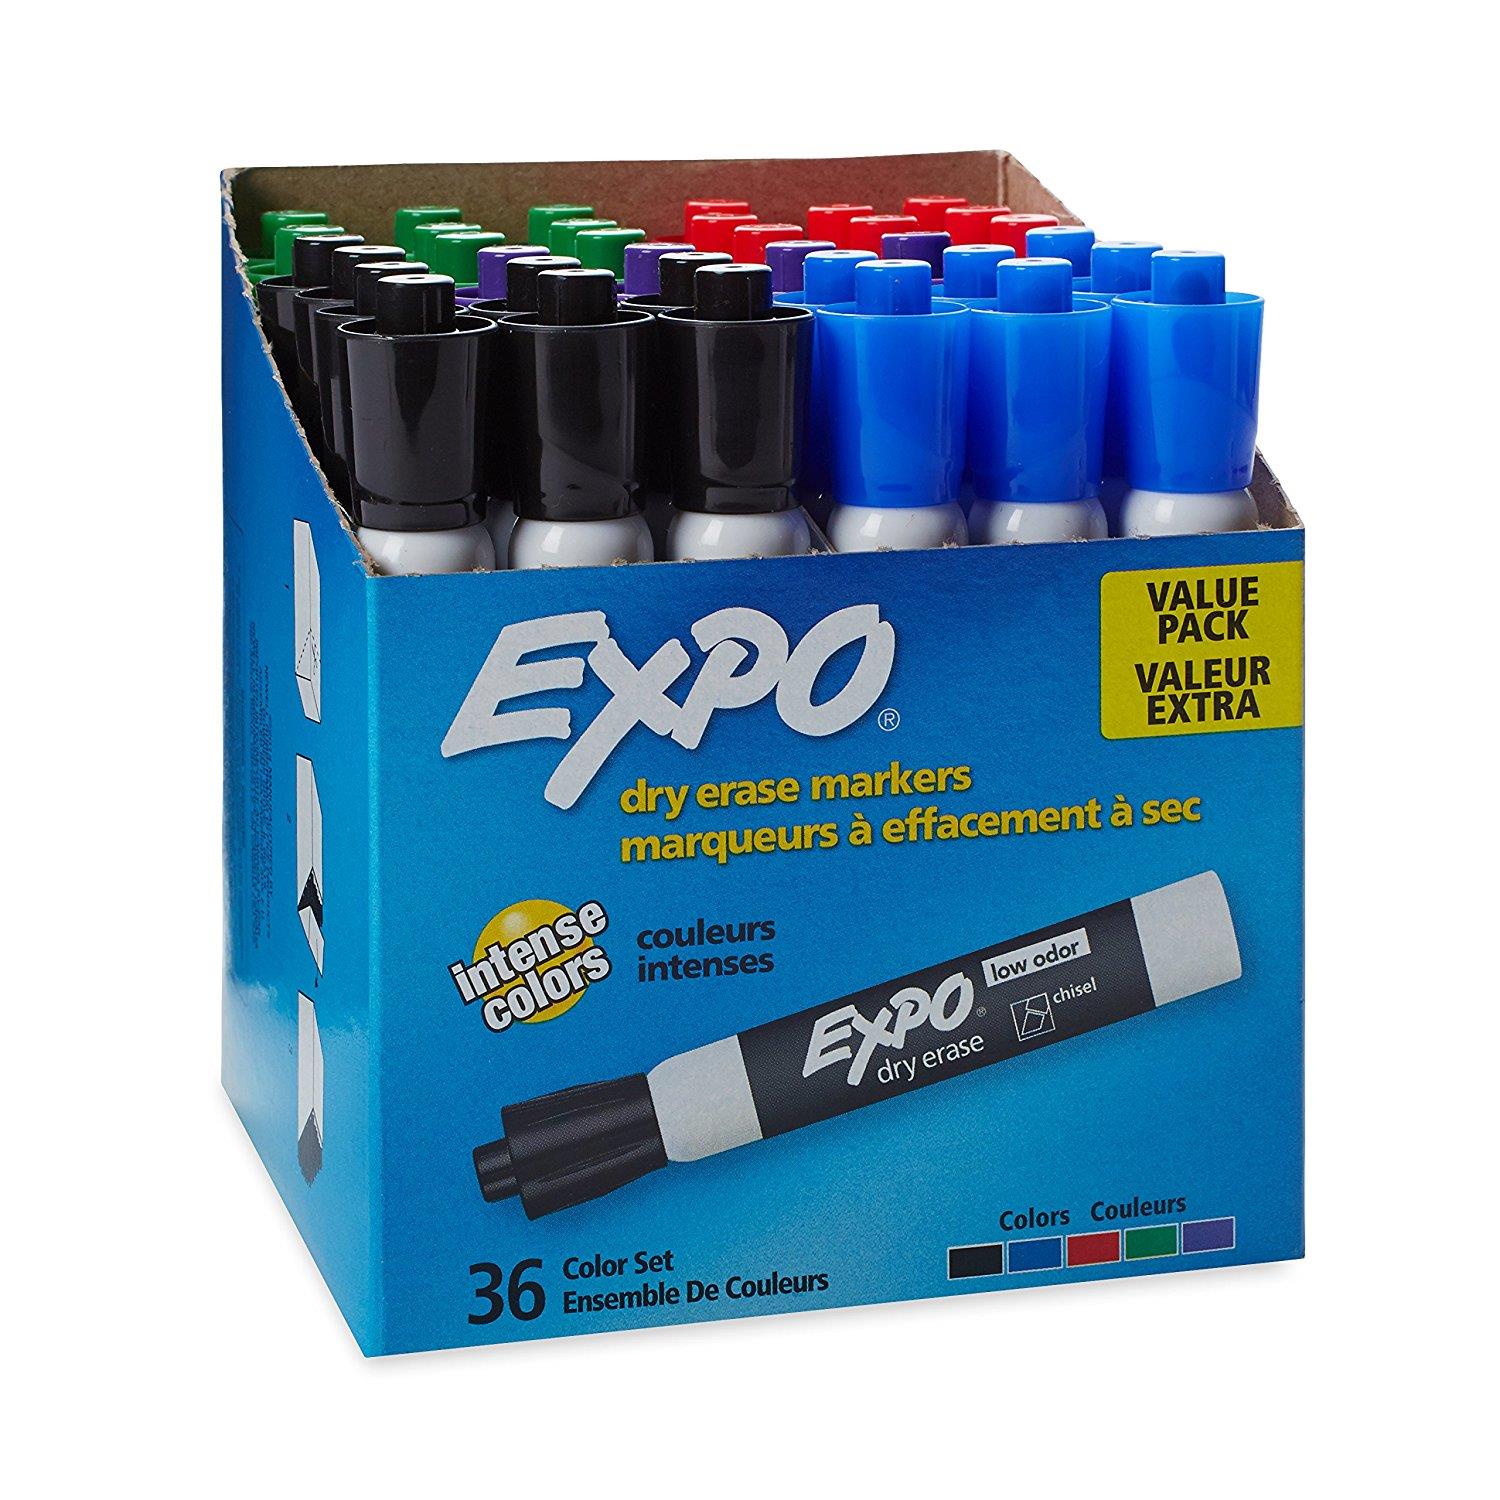 Comix Dry Erase Markers, Chisel Tip White Board Markers, 36 Bulk Assorted Colors Low Odor Markers for Kids Teachers Office Scho